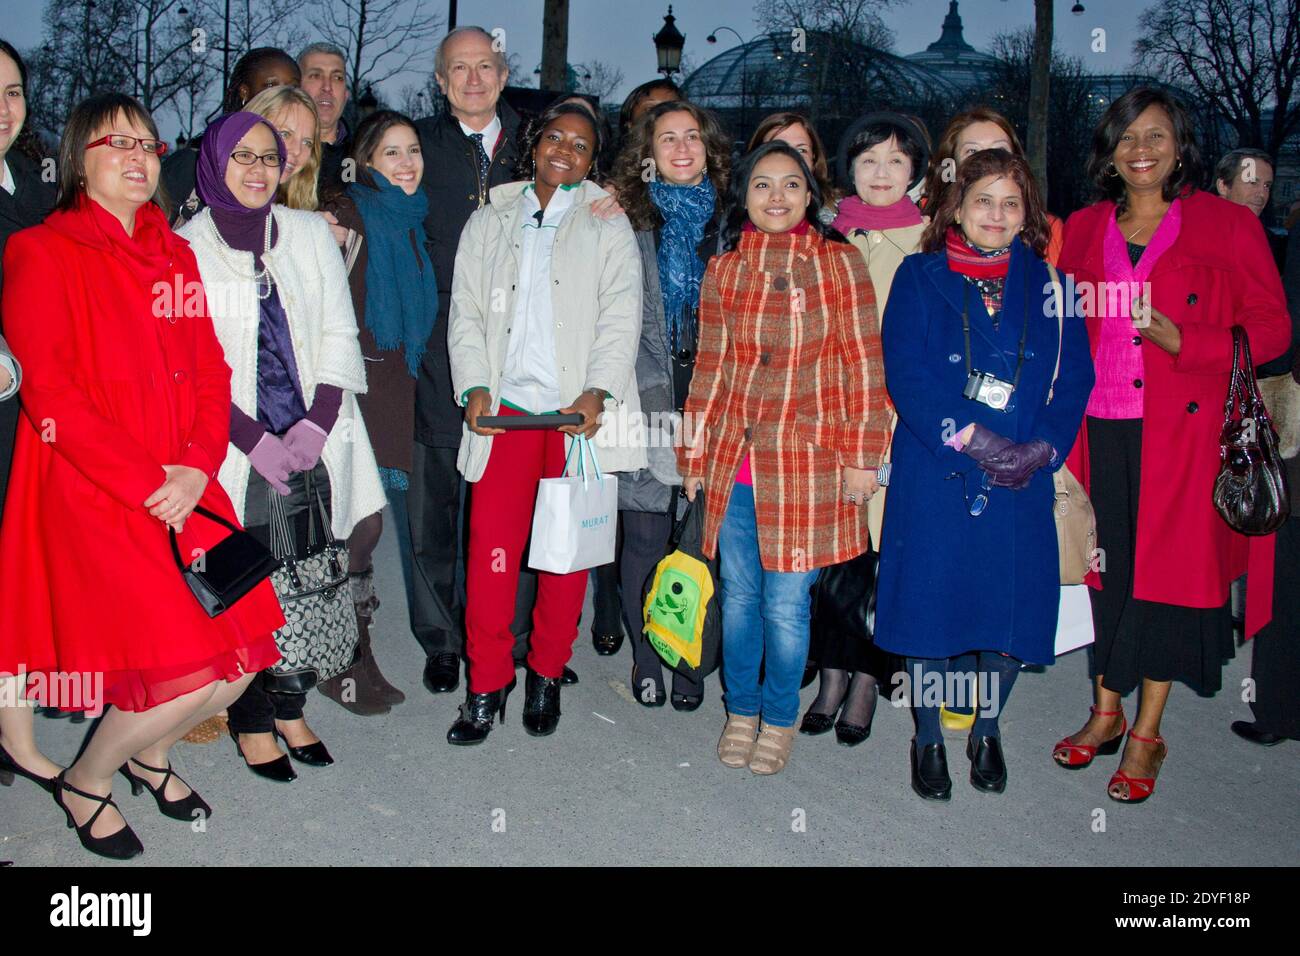 Jean-Paul Agon, President and General Director of L'Oréal and Président of the L'Oréal Foundation, Reiko Kuroda, Pratibha L. Gai, Francisca Nneka Okeke attending the unveilling of the 'L'Oreal-Unesco Awards for women in Science' photo exhibition at Avenue des Champs-Elysees on March 27, 2013 in Paris, France. Photo by Aurore Marechal/ABACAPRESS.COM Stock Photo